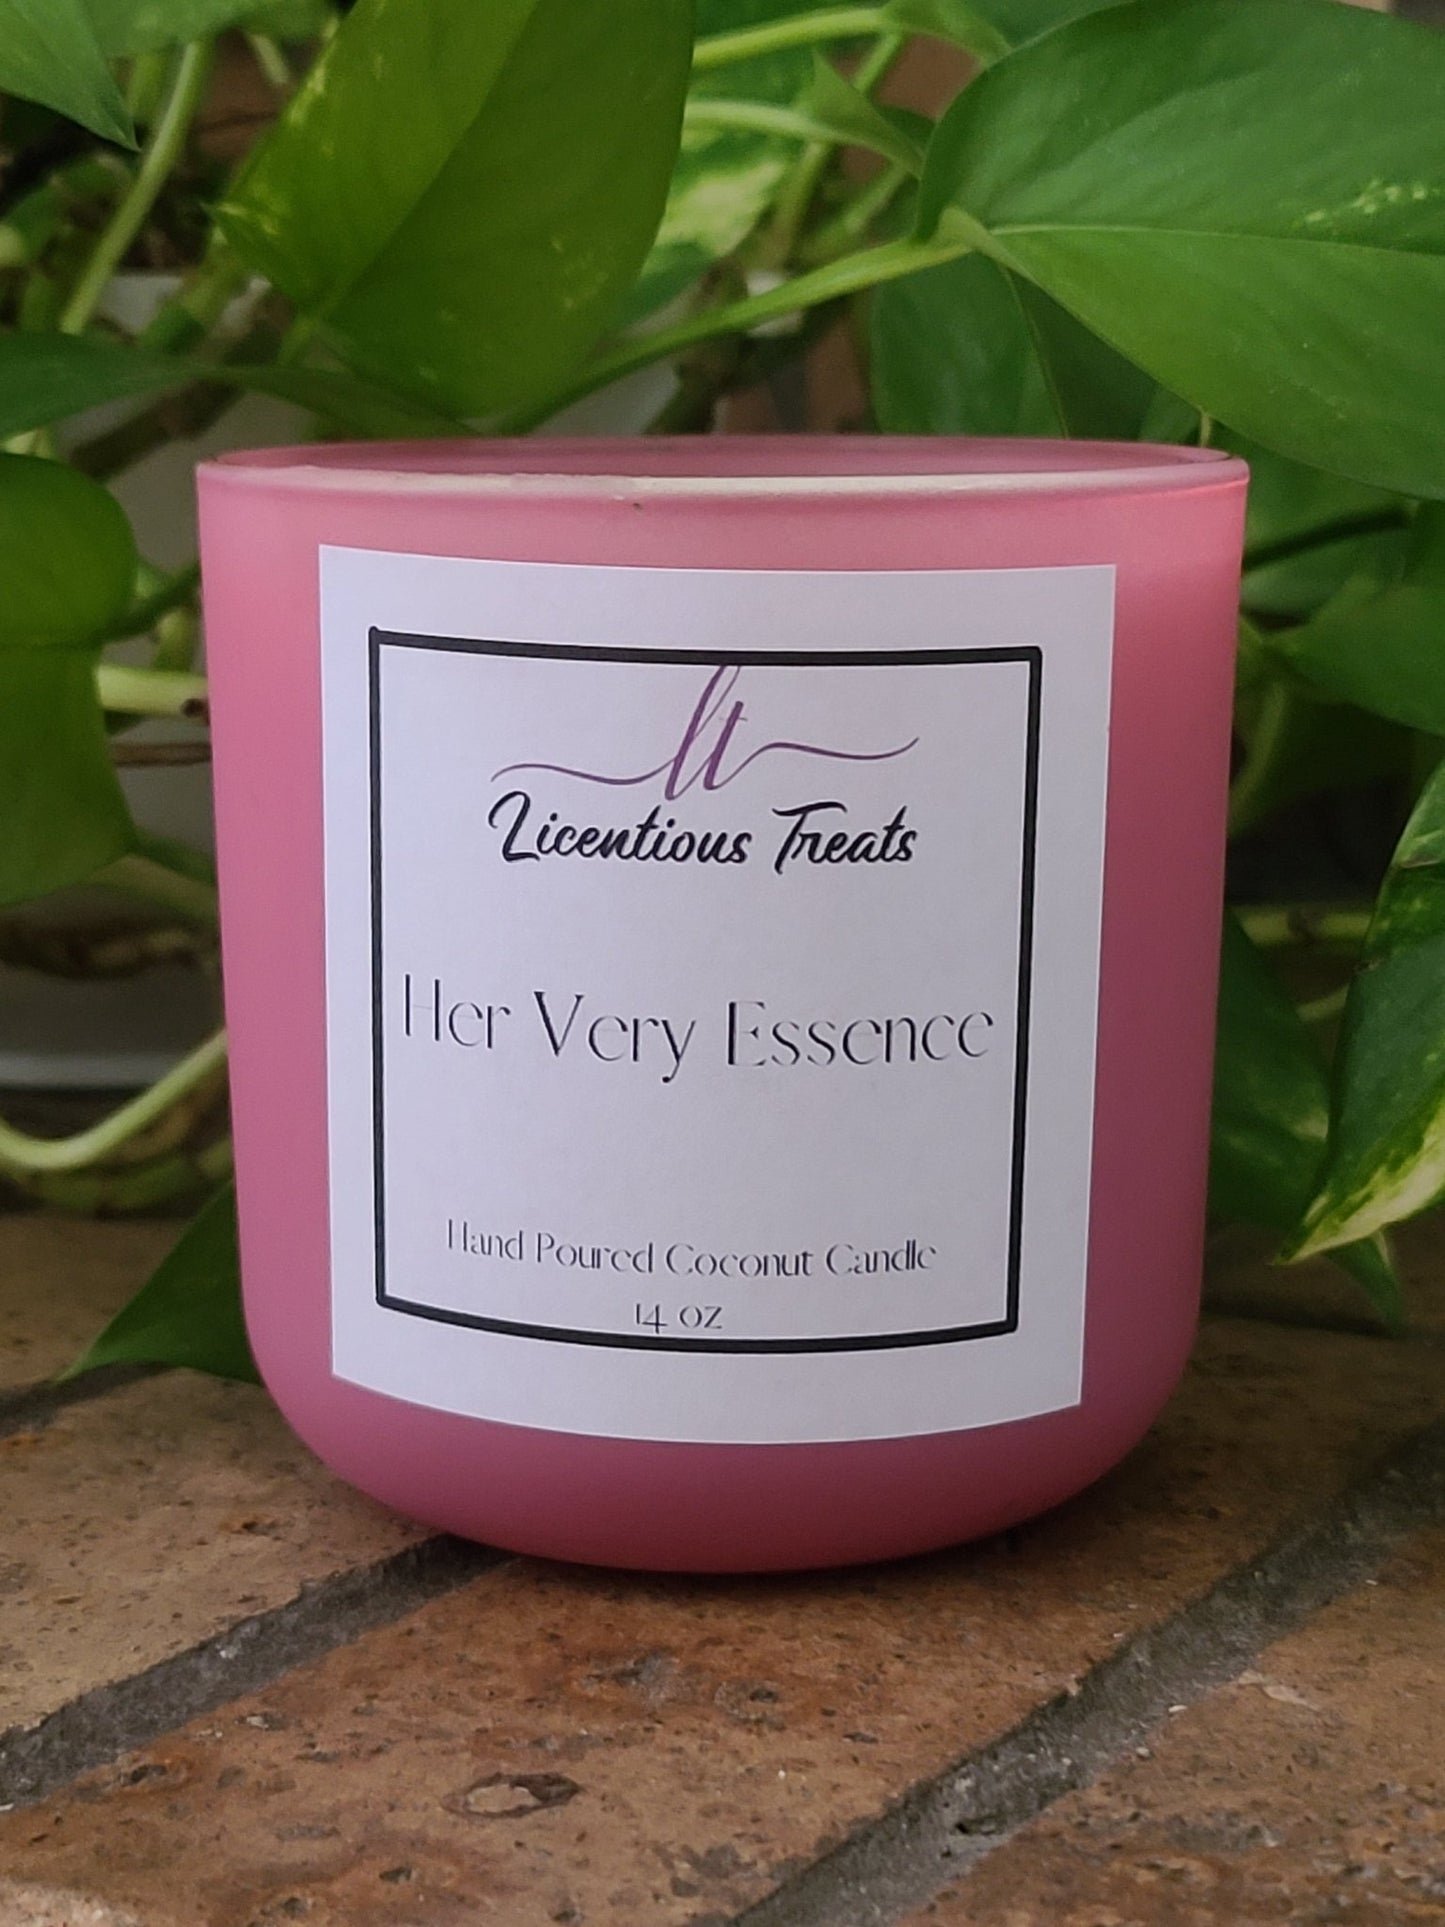 Candles - Her Very Essence 14oz - Licentious TreatsCandles - Her Very Essence 14oz